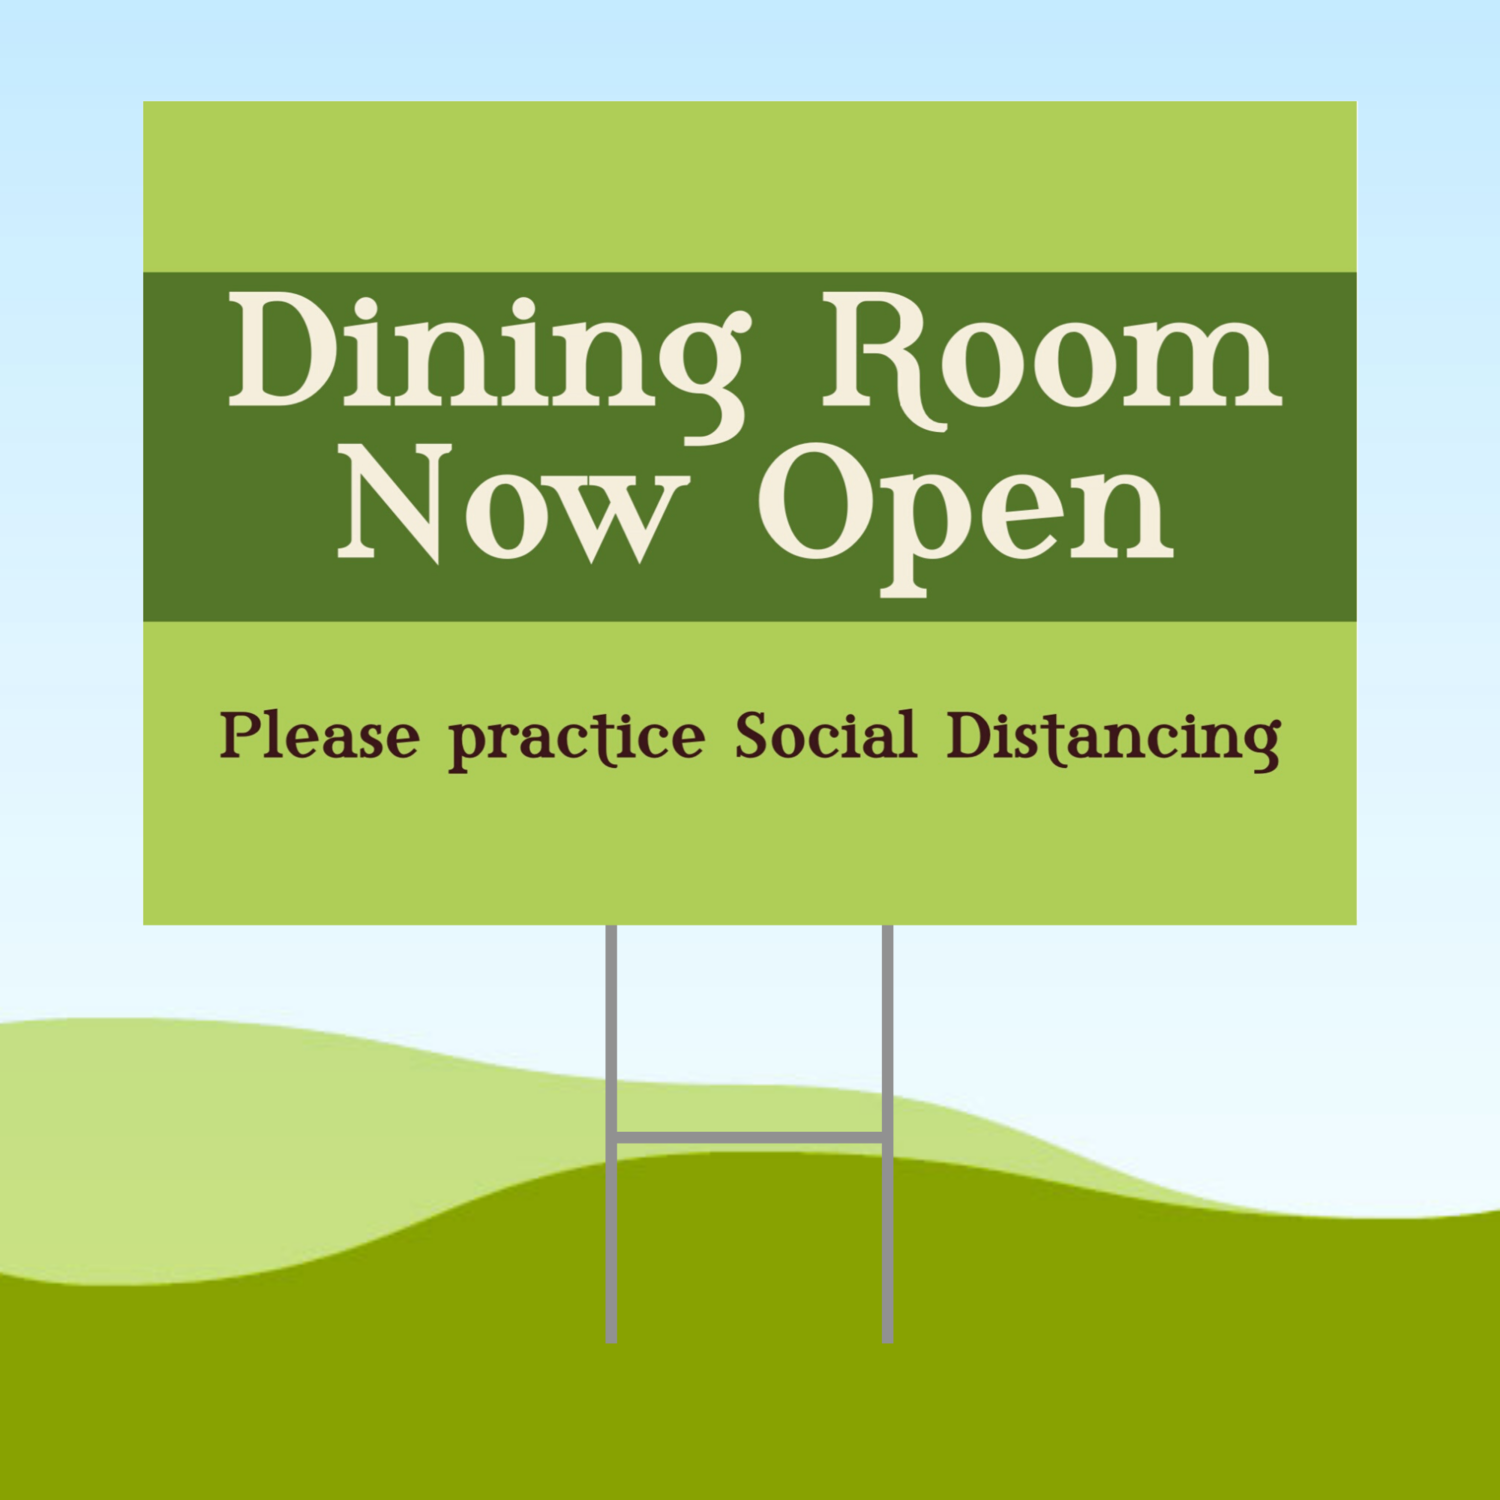 Dining Room Now Open 18x24 Yard Sign WITH STAKE Corrugated Plastic Bandit